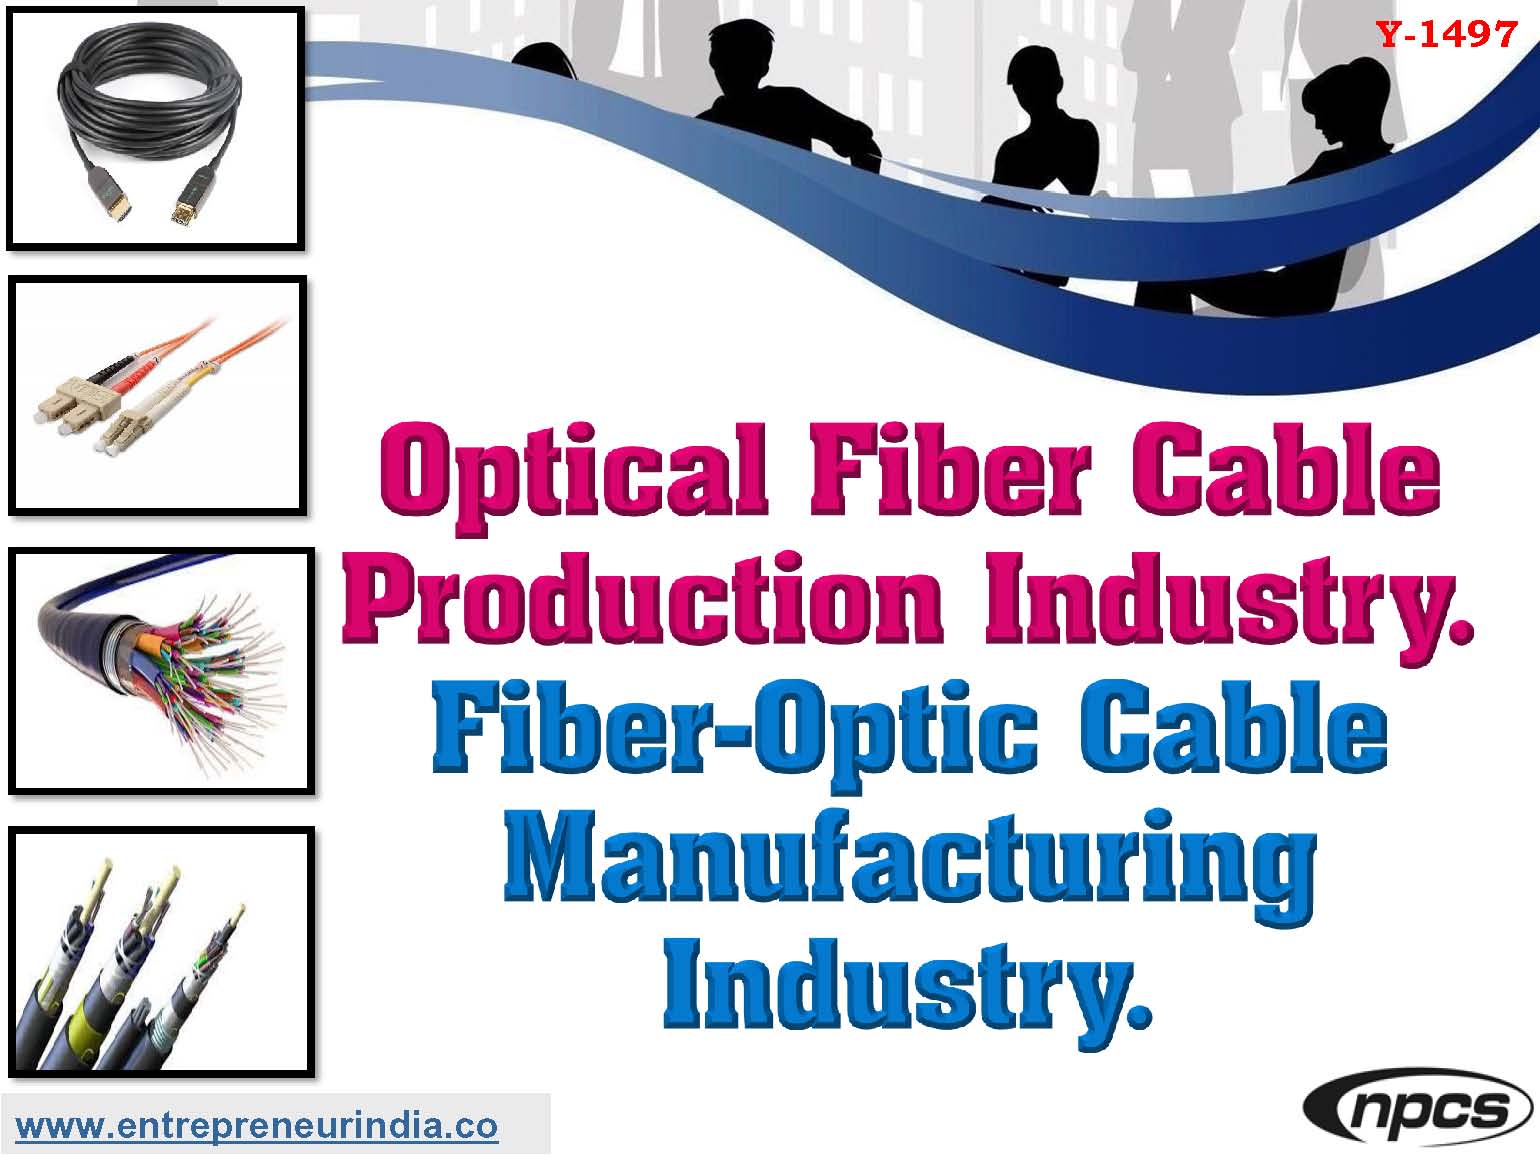 Optical Fiber Cable Production Industry.jpg